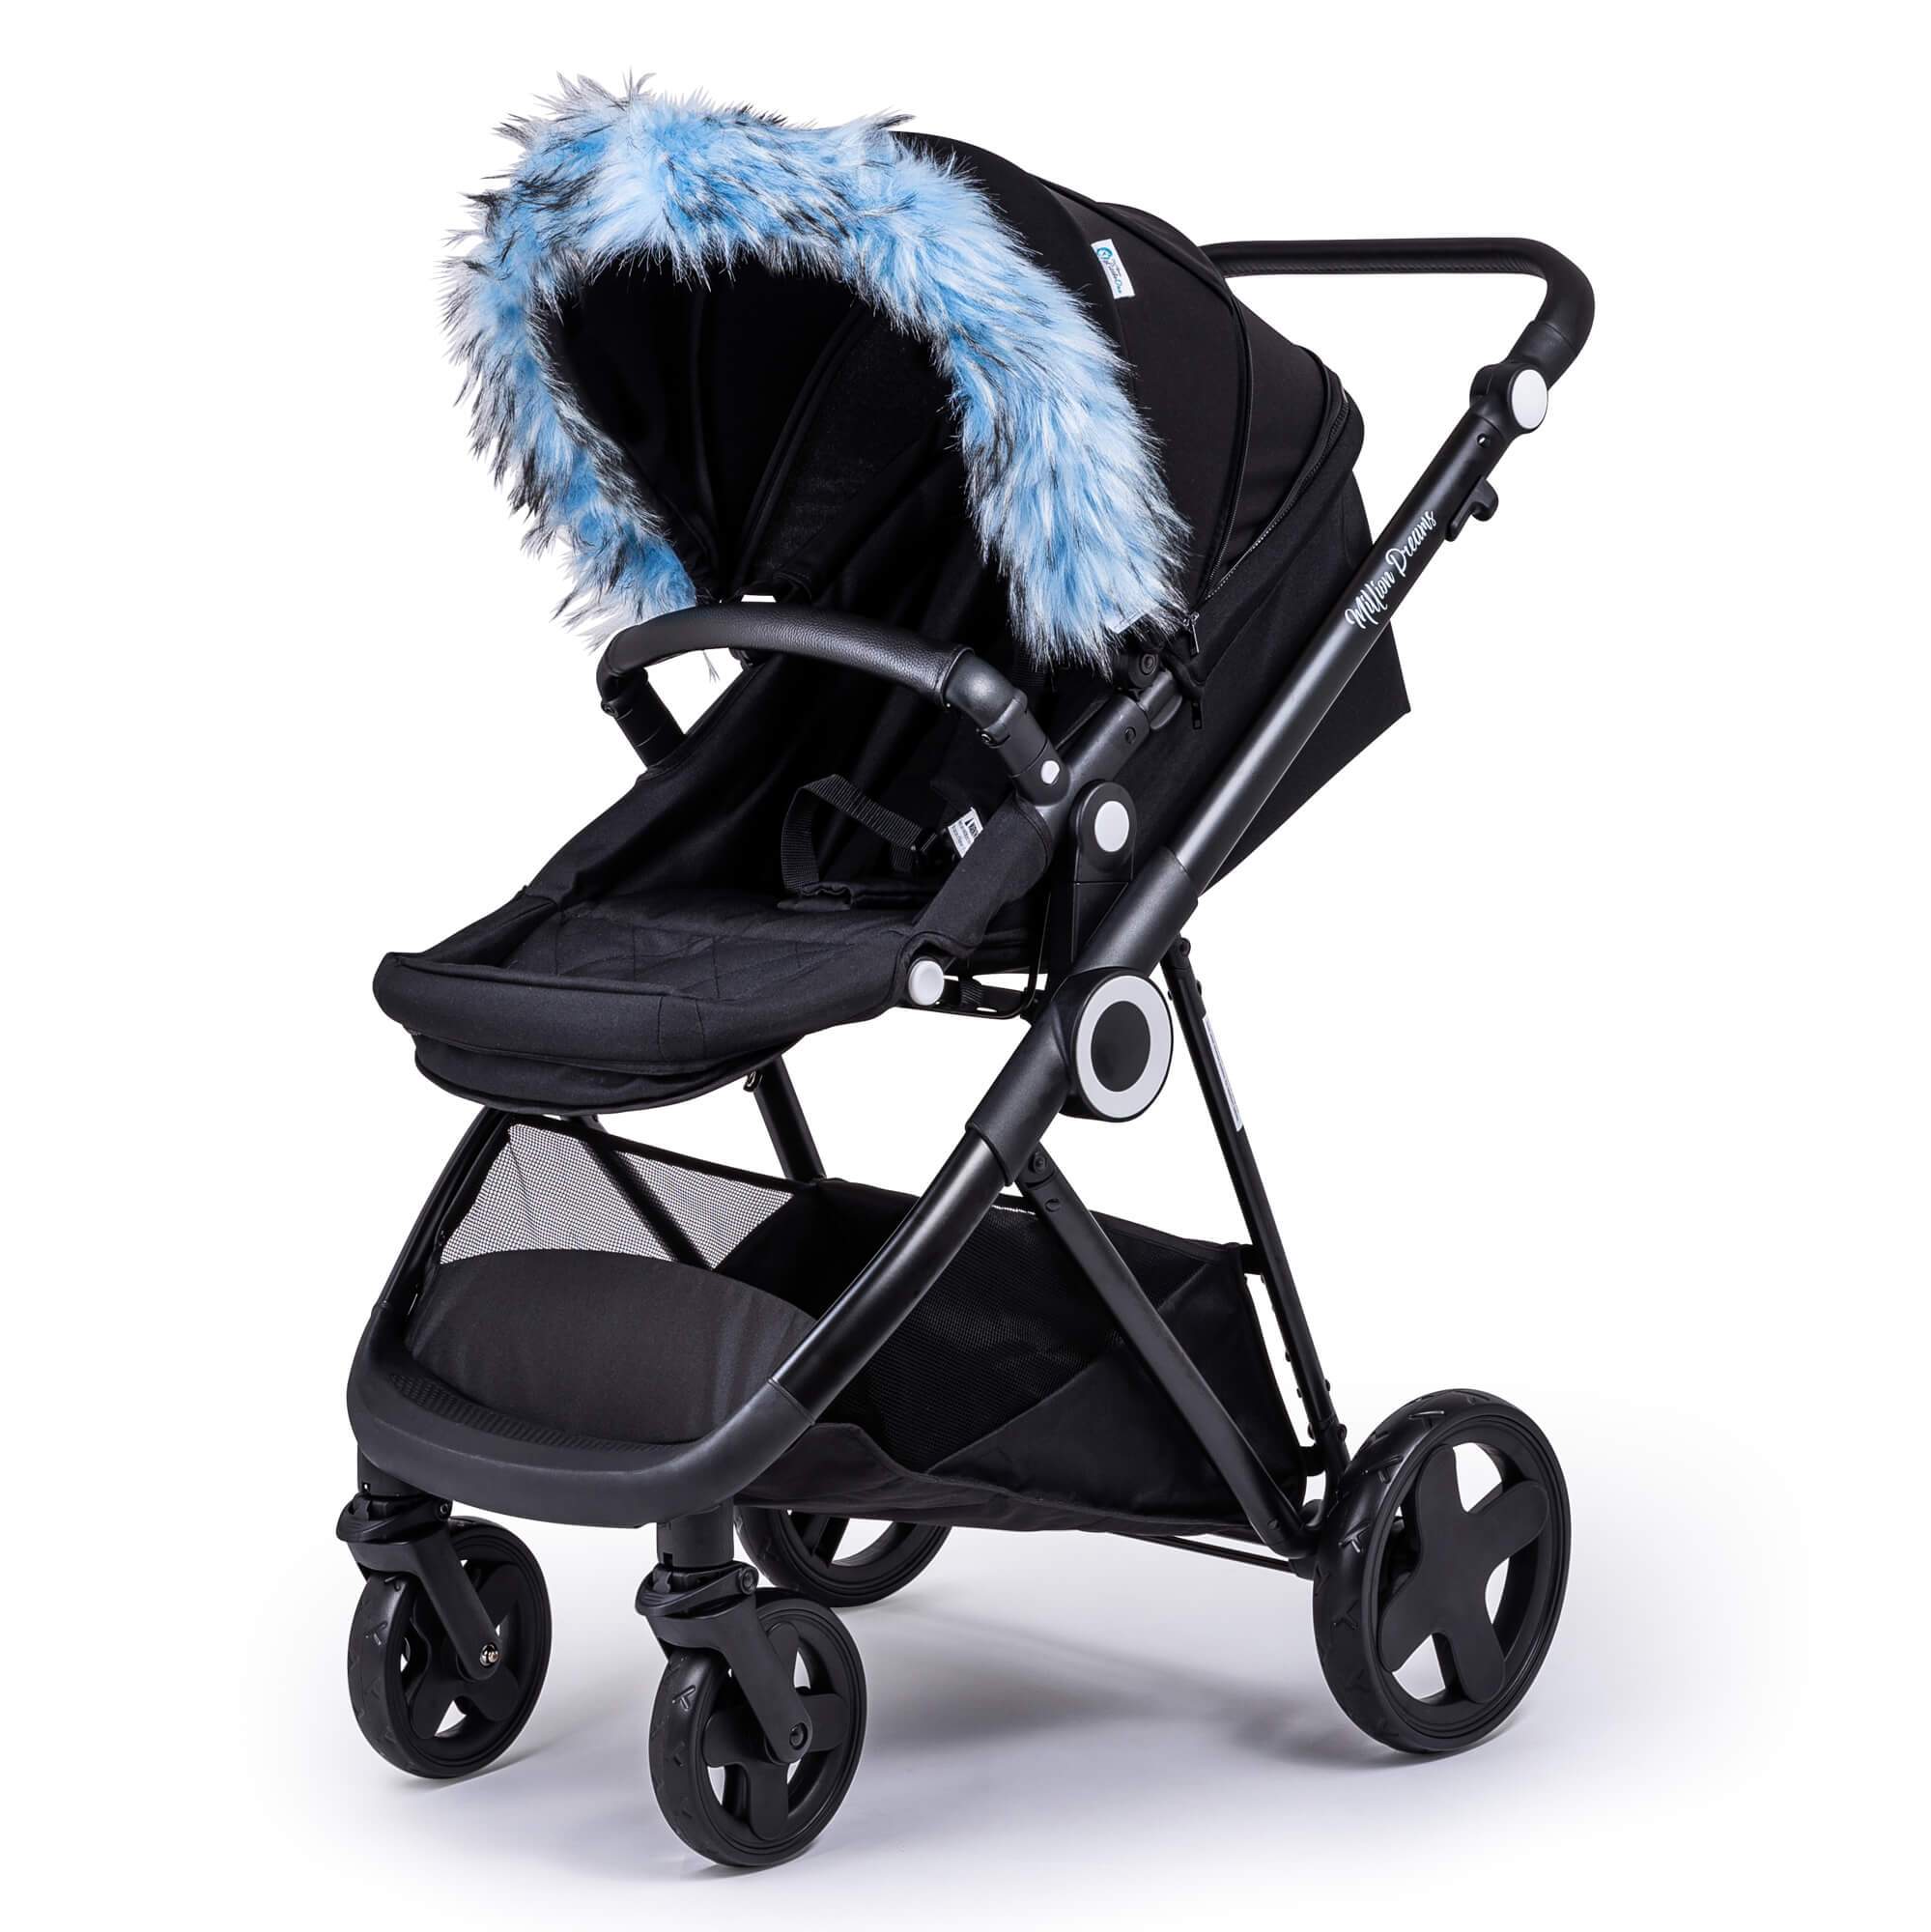 Pram Fur Hood Trim Attachment for Pushchair Compatible with Jane - Light Blue / Fits All Models | For Your Little One